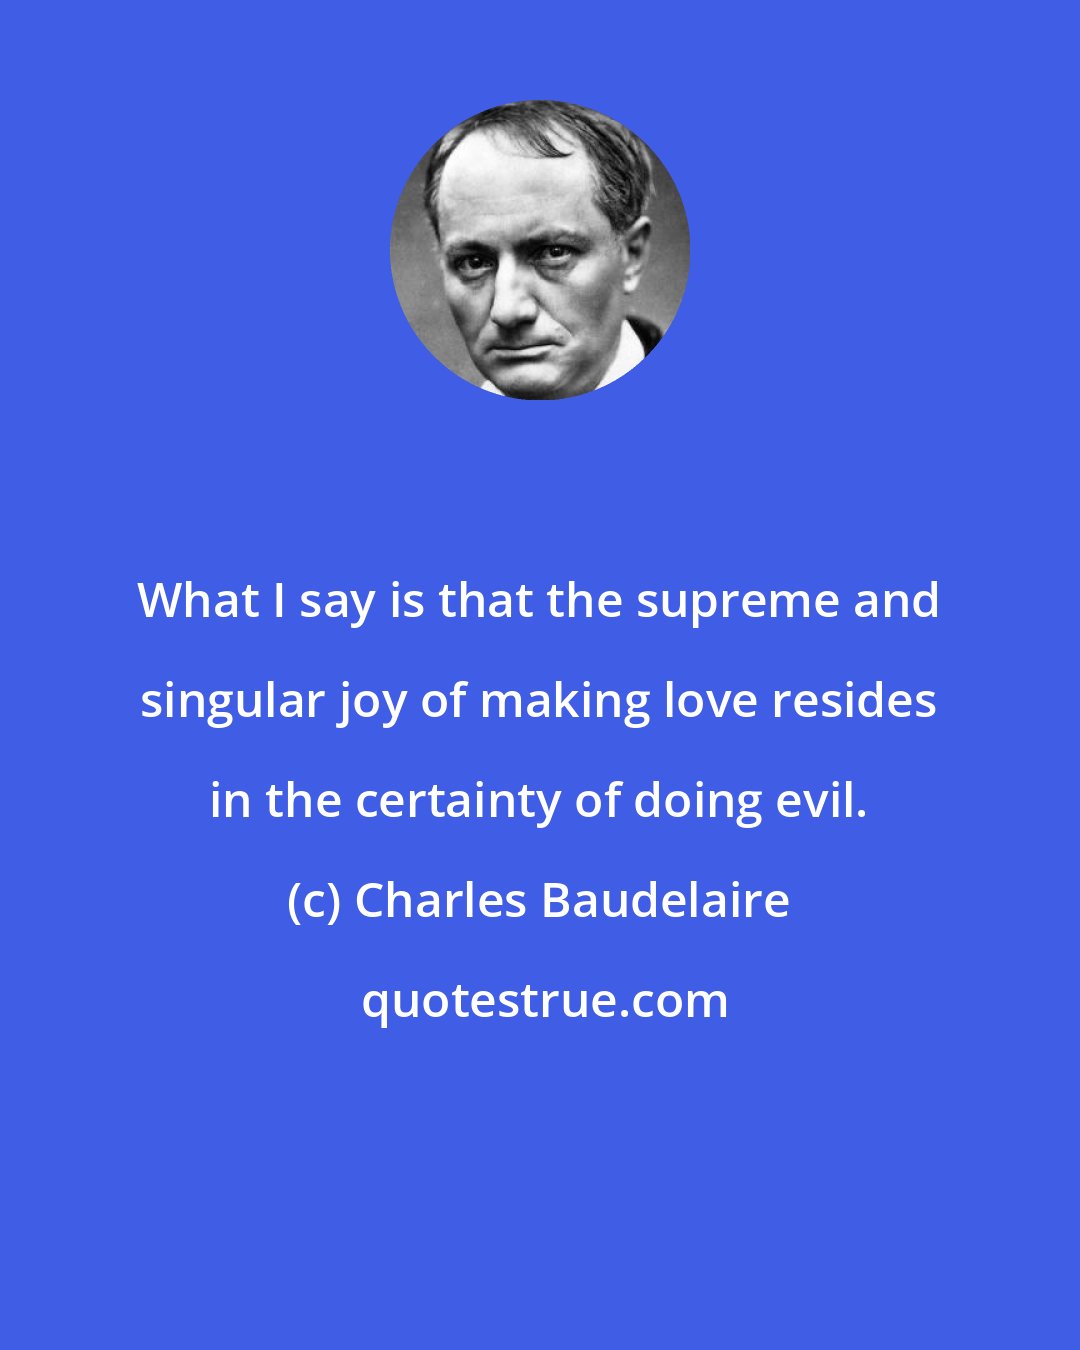 Charles Baudelaire: What I say is that the supreme and singular joy of making love resides in the certainty of doing evil.